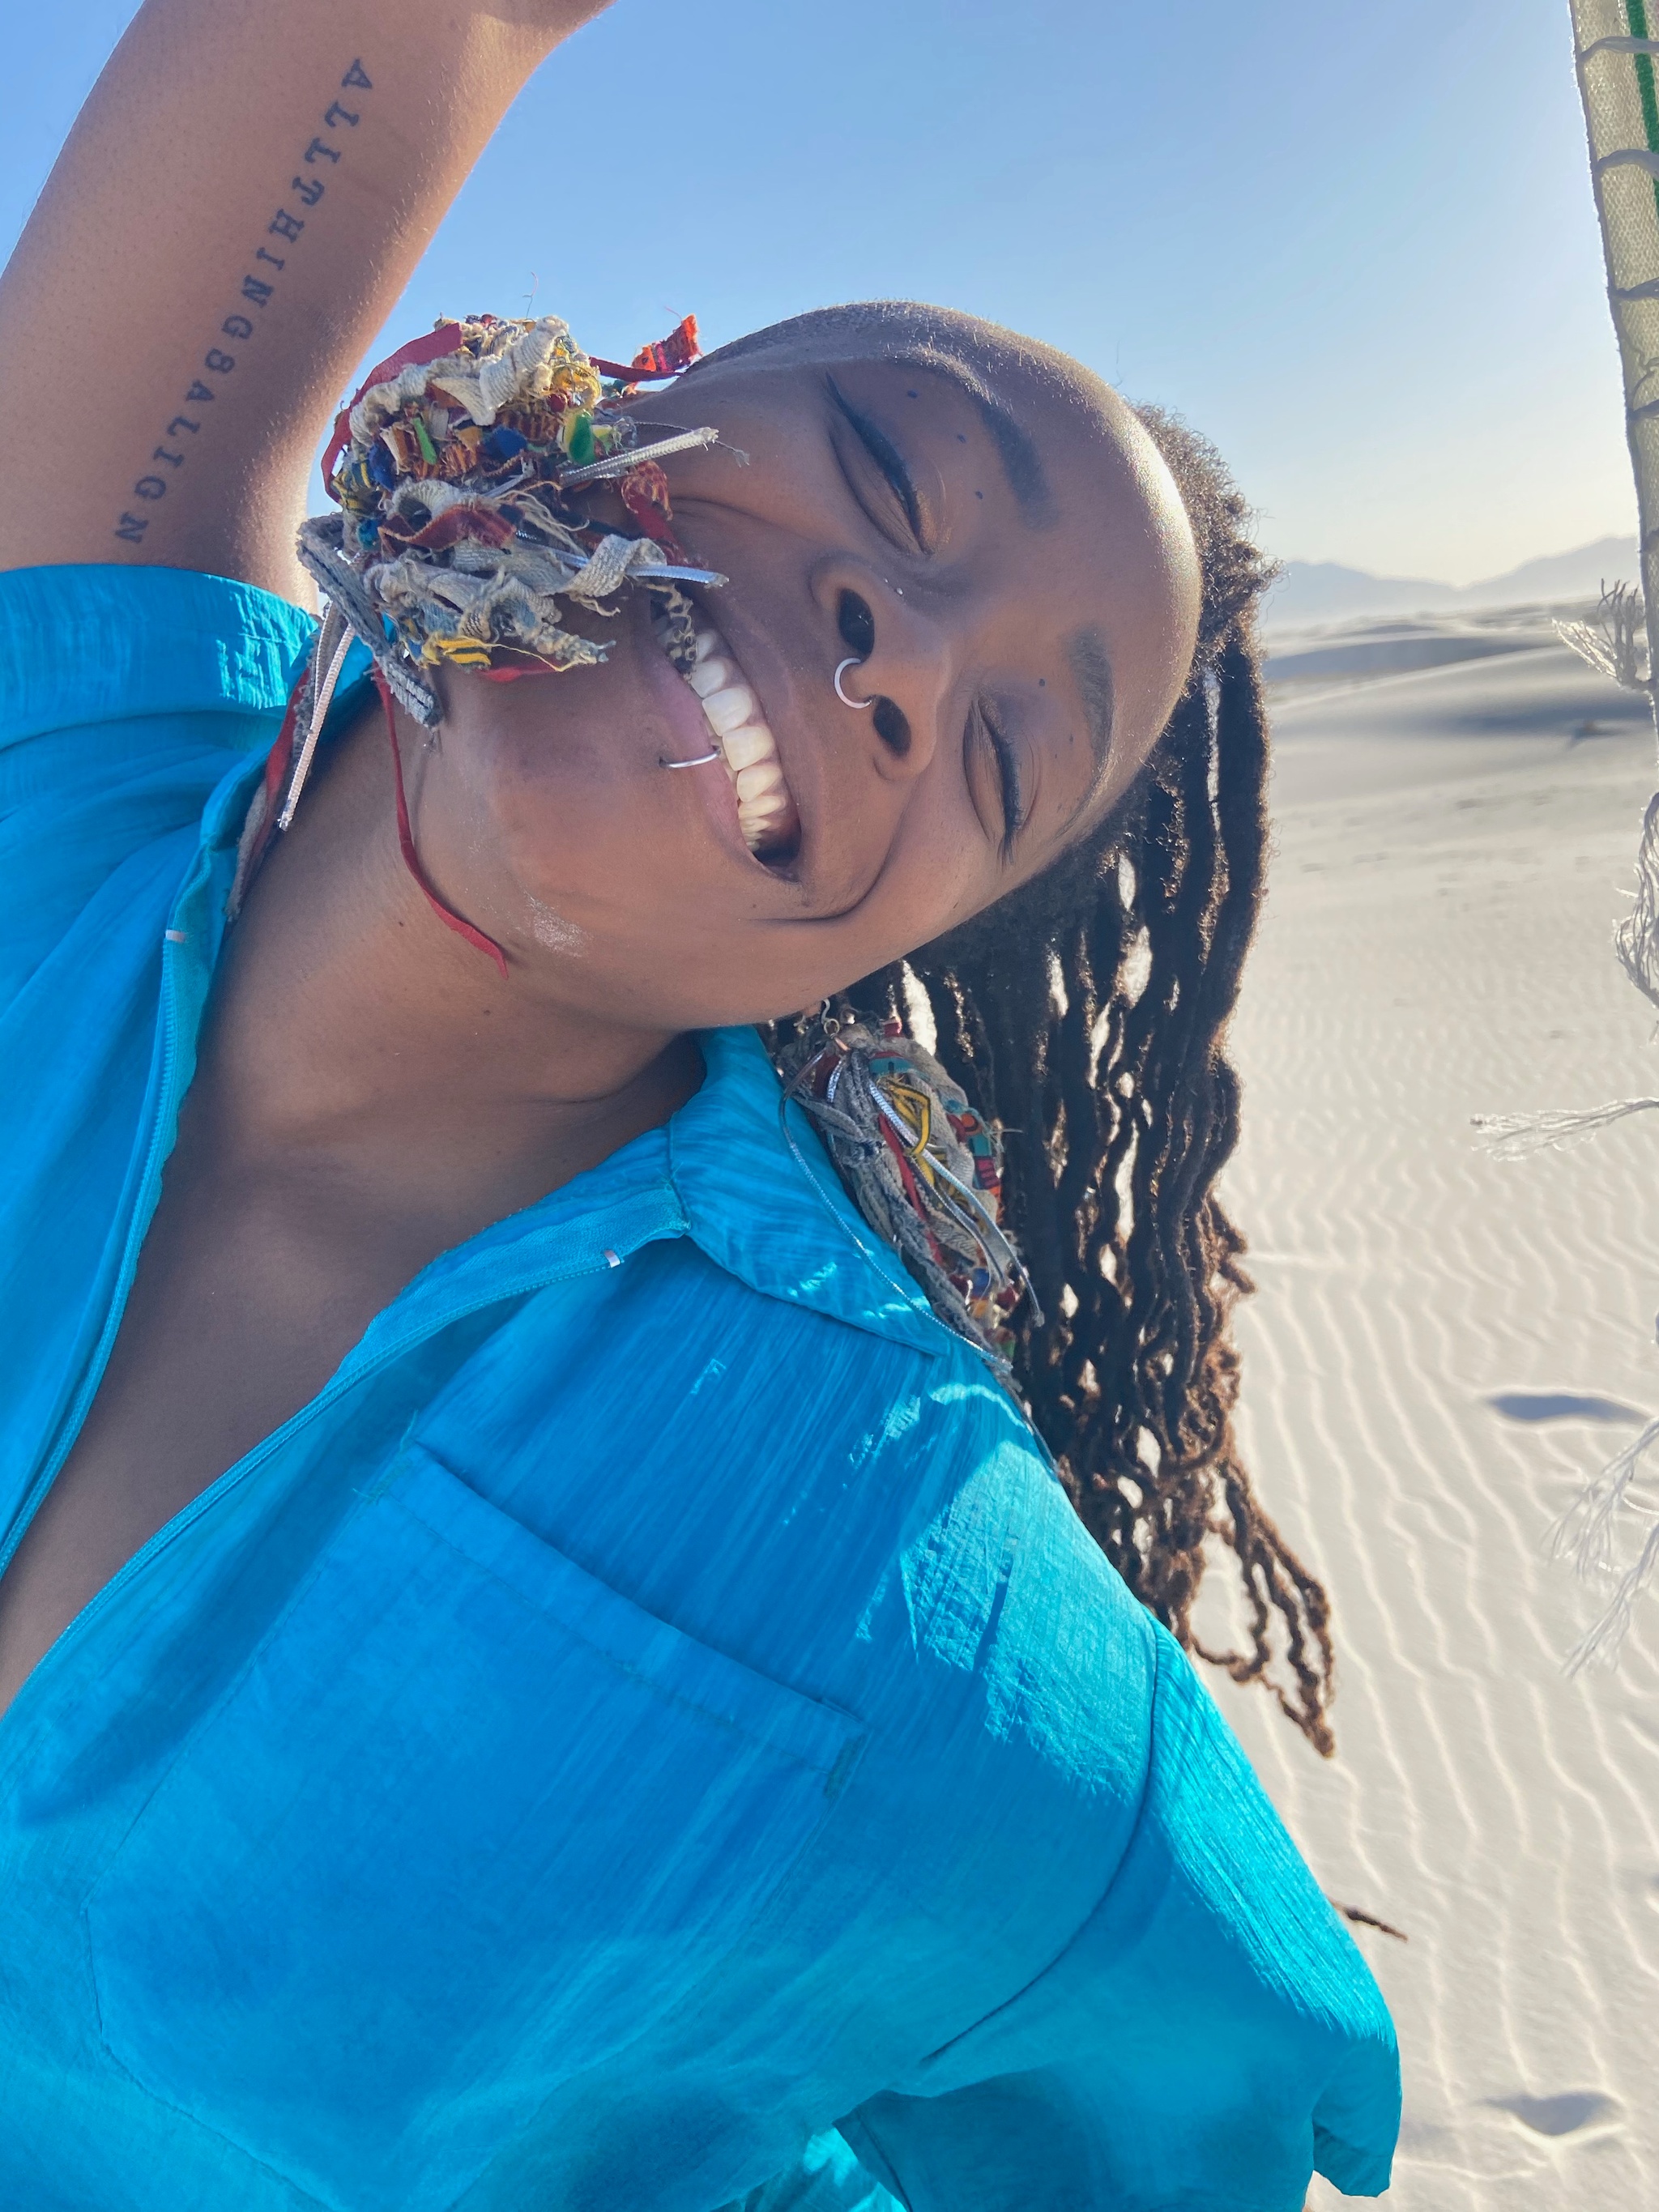 A smiling Black woman in a bright blue shirt leans over with with her head slightly back, one are raised, and a desert landscape in the background. She has a lip ring, nose ring, and a tattoo on the underside of her upper arm. 